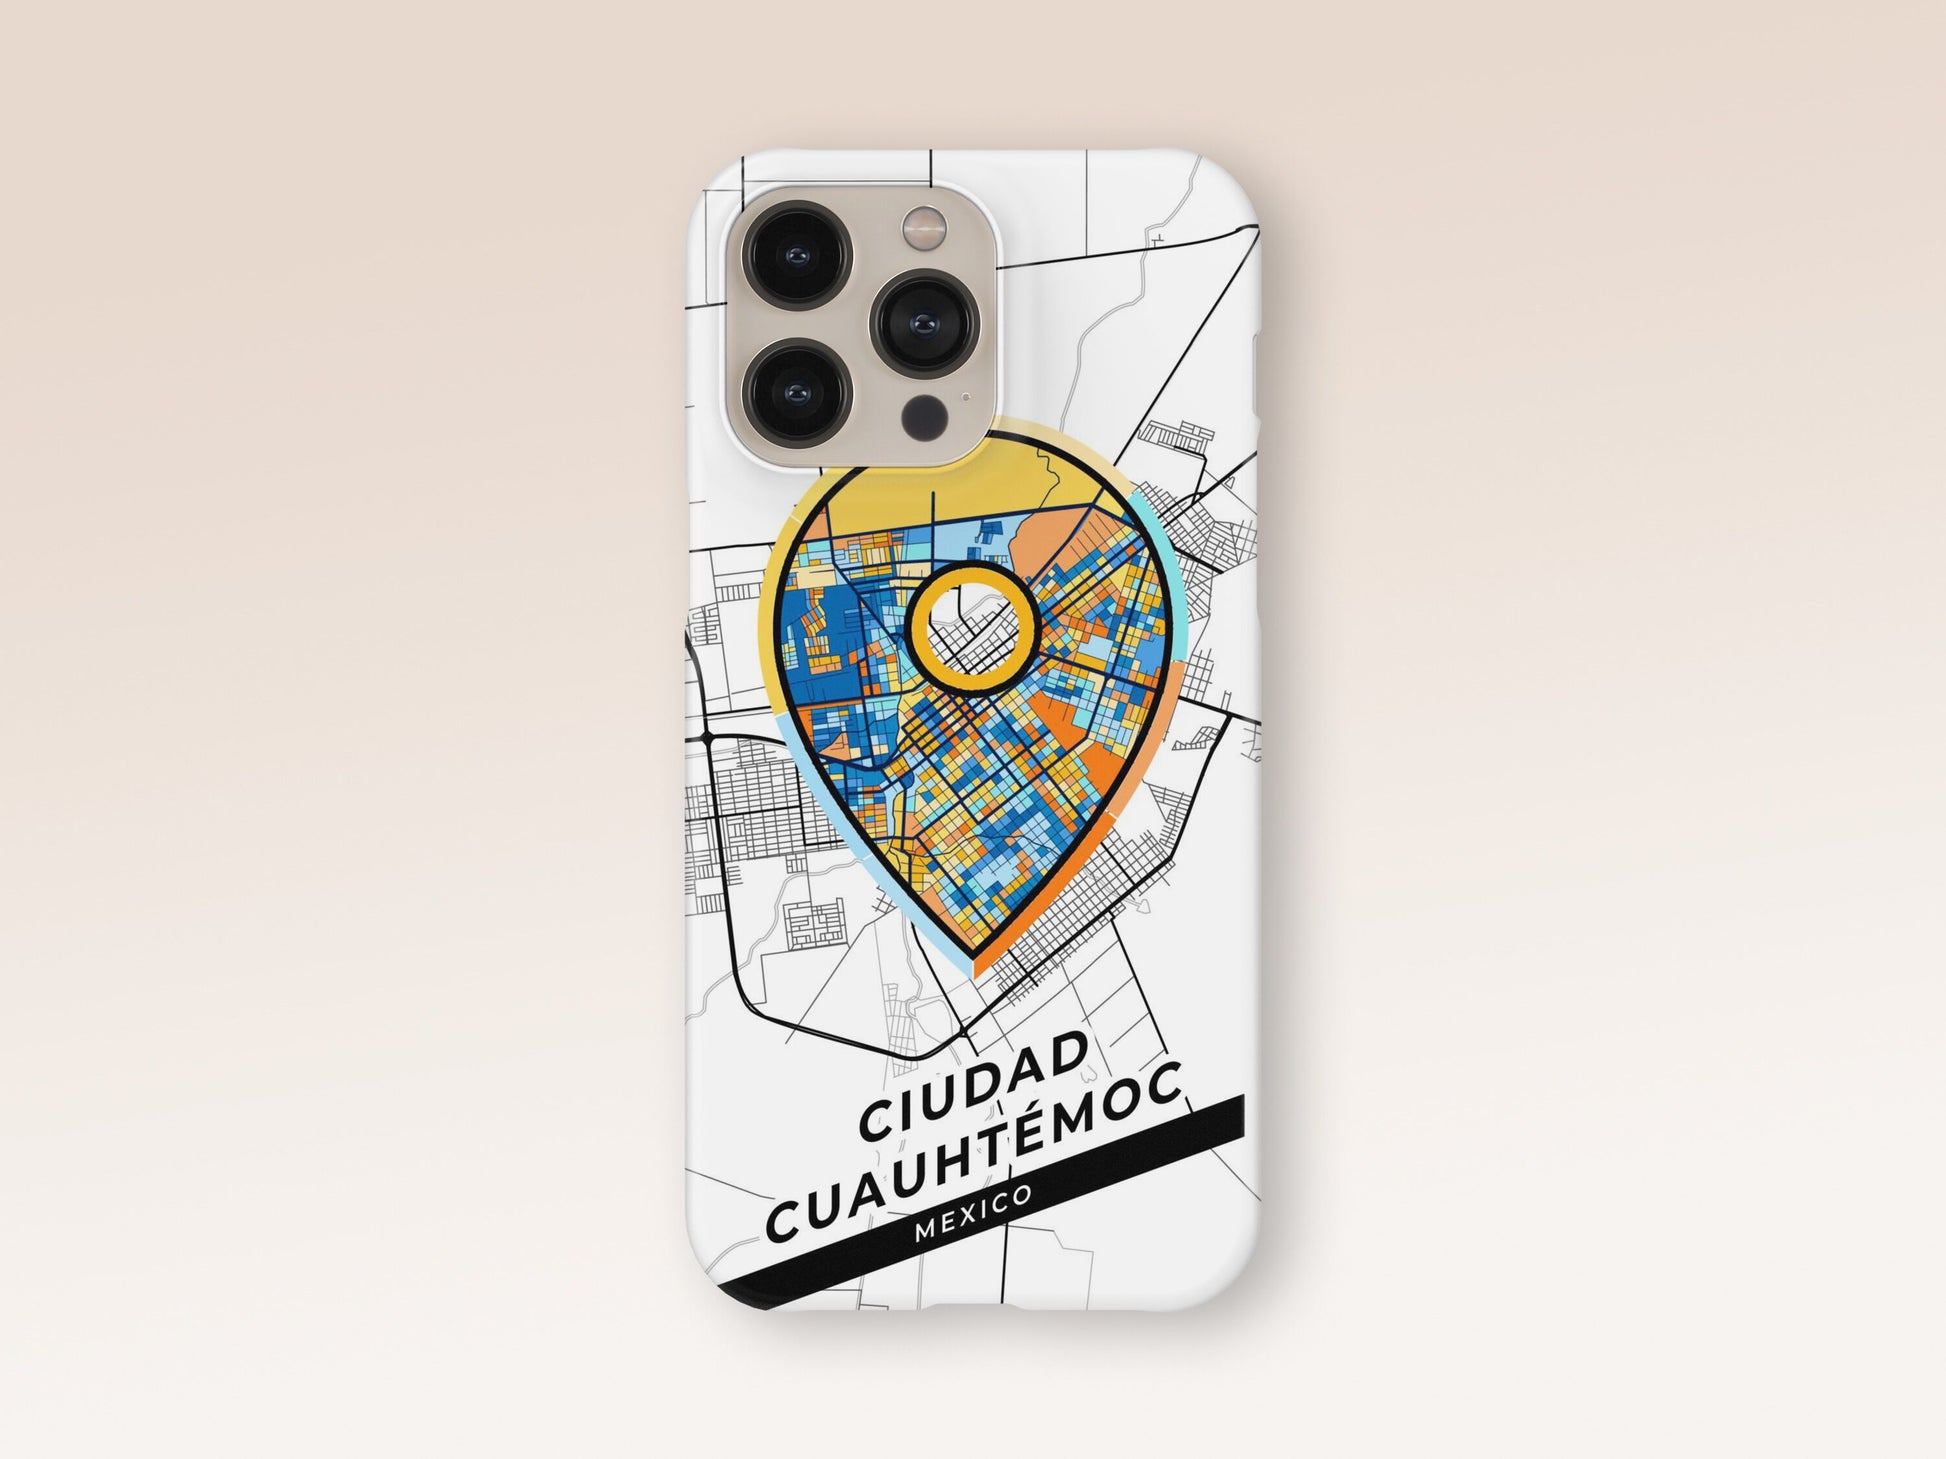 Ciudad Cuauhtémoc Mexico slim phone case with colorful icon. Birthday, wedding or housewarming gift. Couple match cases. 1